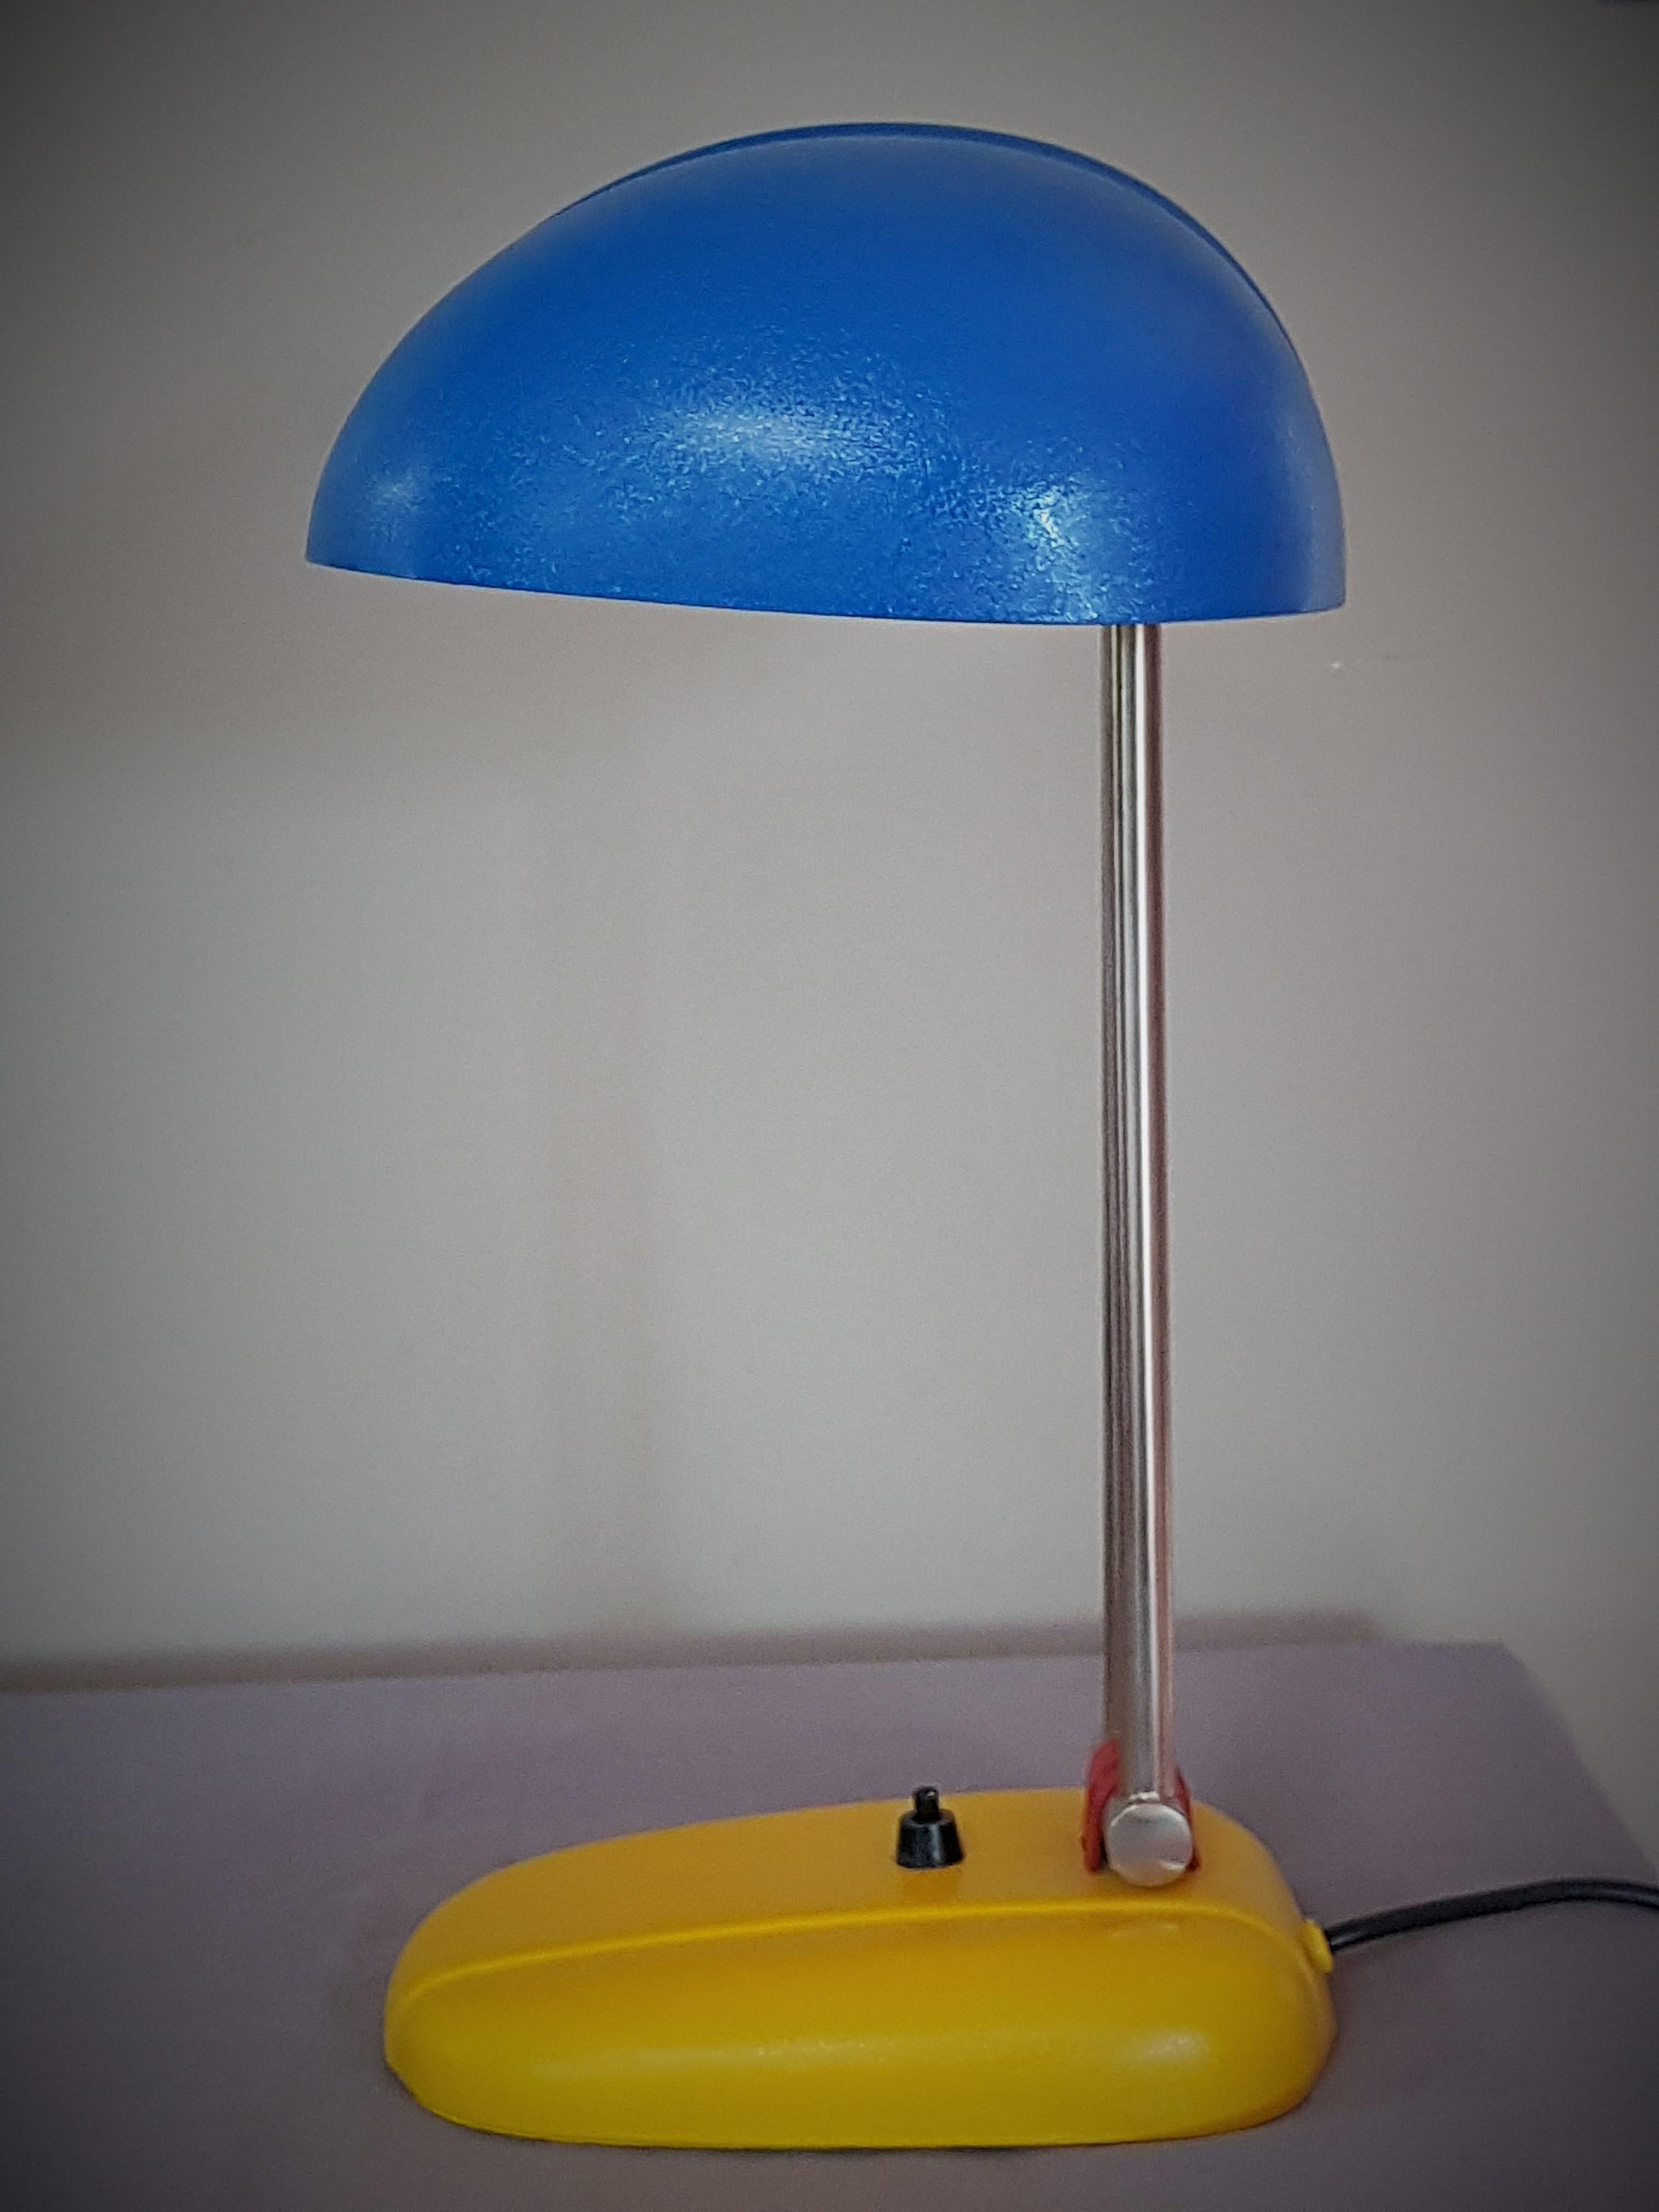 Art Deco Midcentury Swiss Table Lamp by S. Giedion for BAG Turgi, 1930s For Sale 10